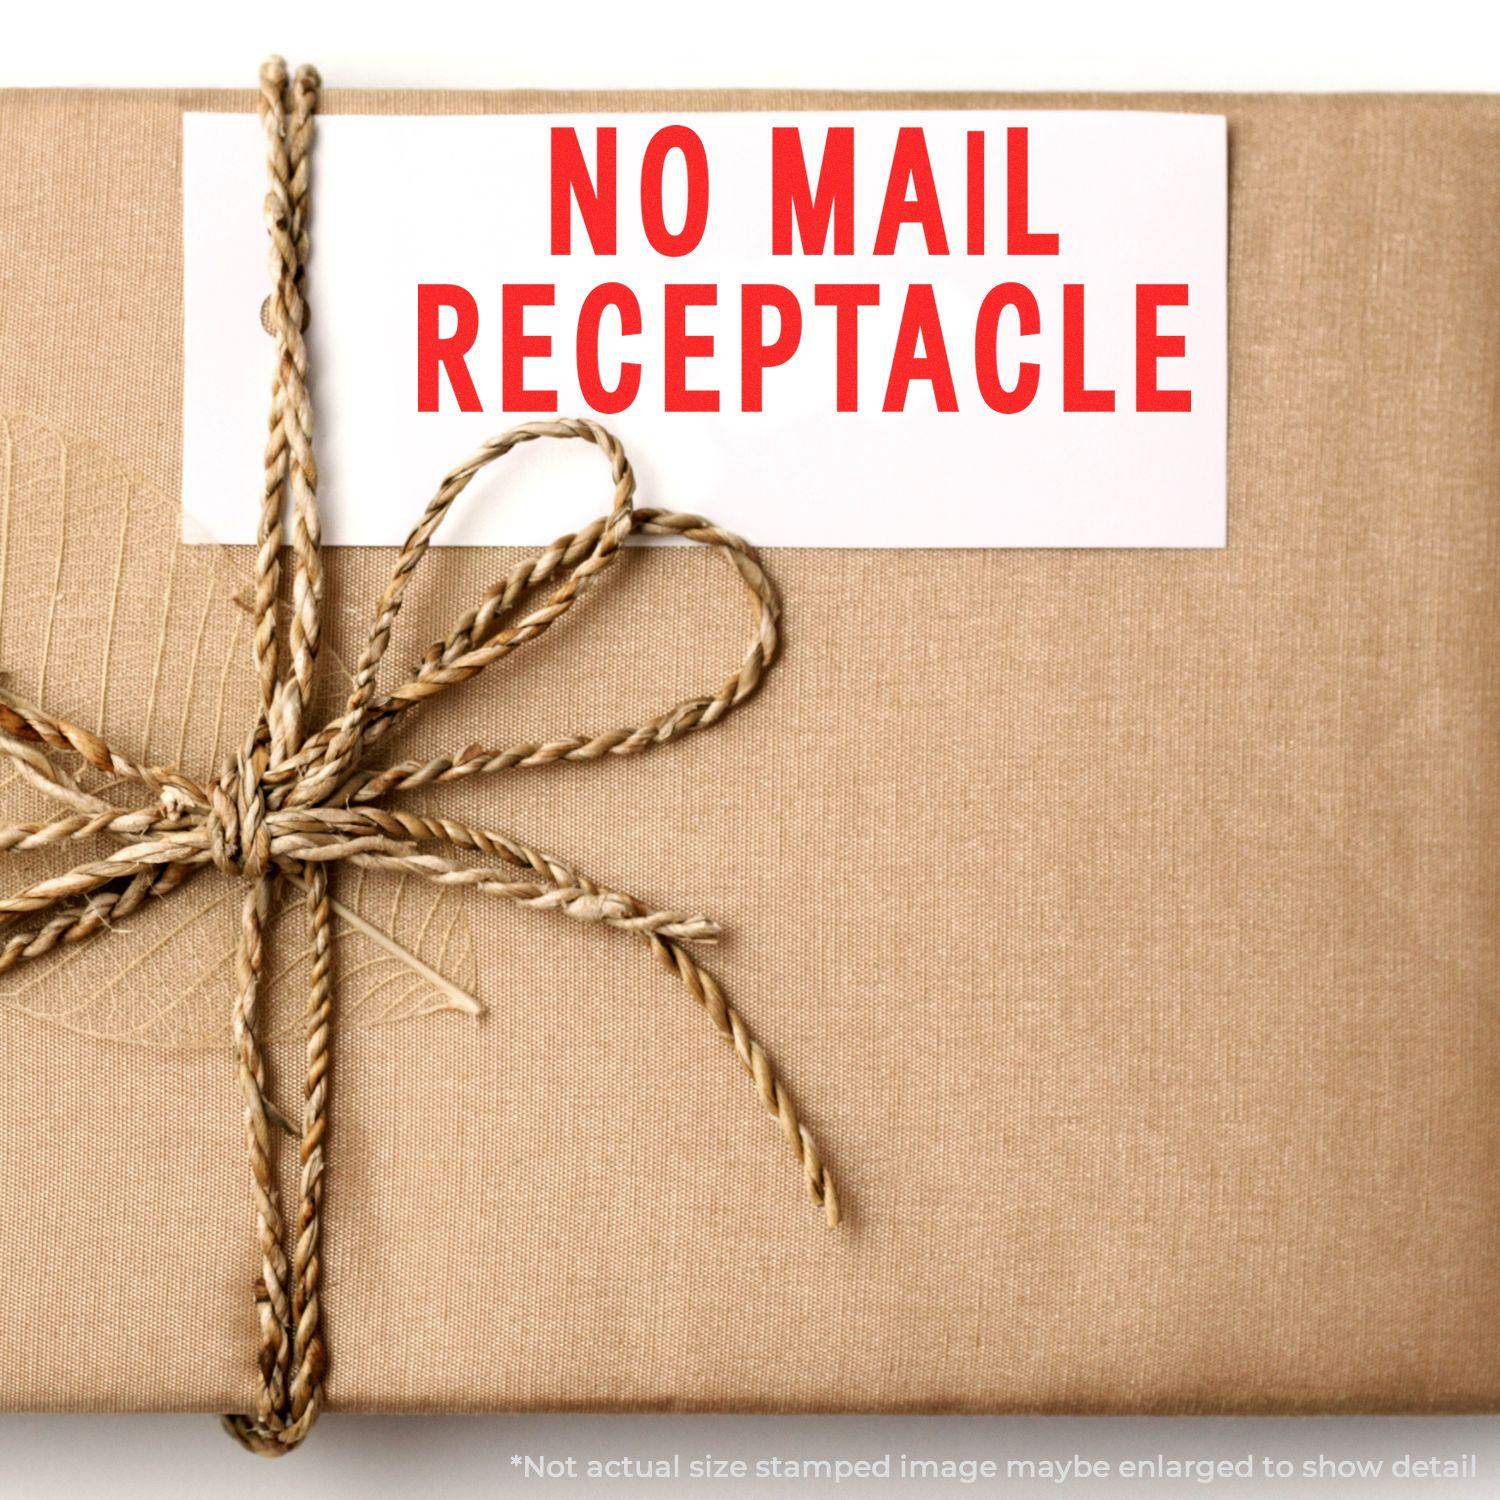 A stock office rubber stamp with a stamped image showing how the text "NO MAIL RECEPTACLE" is displayed after stamping.